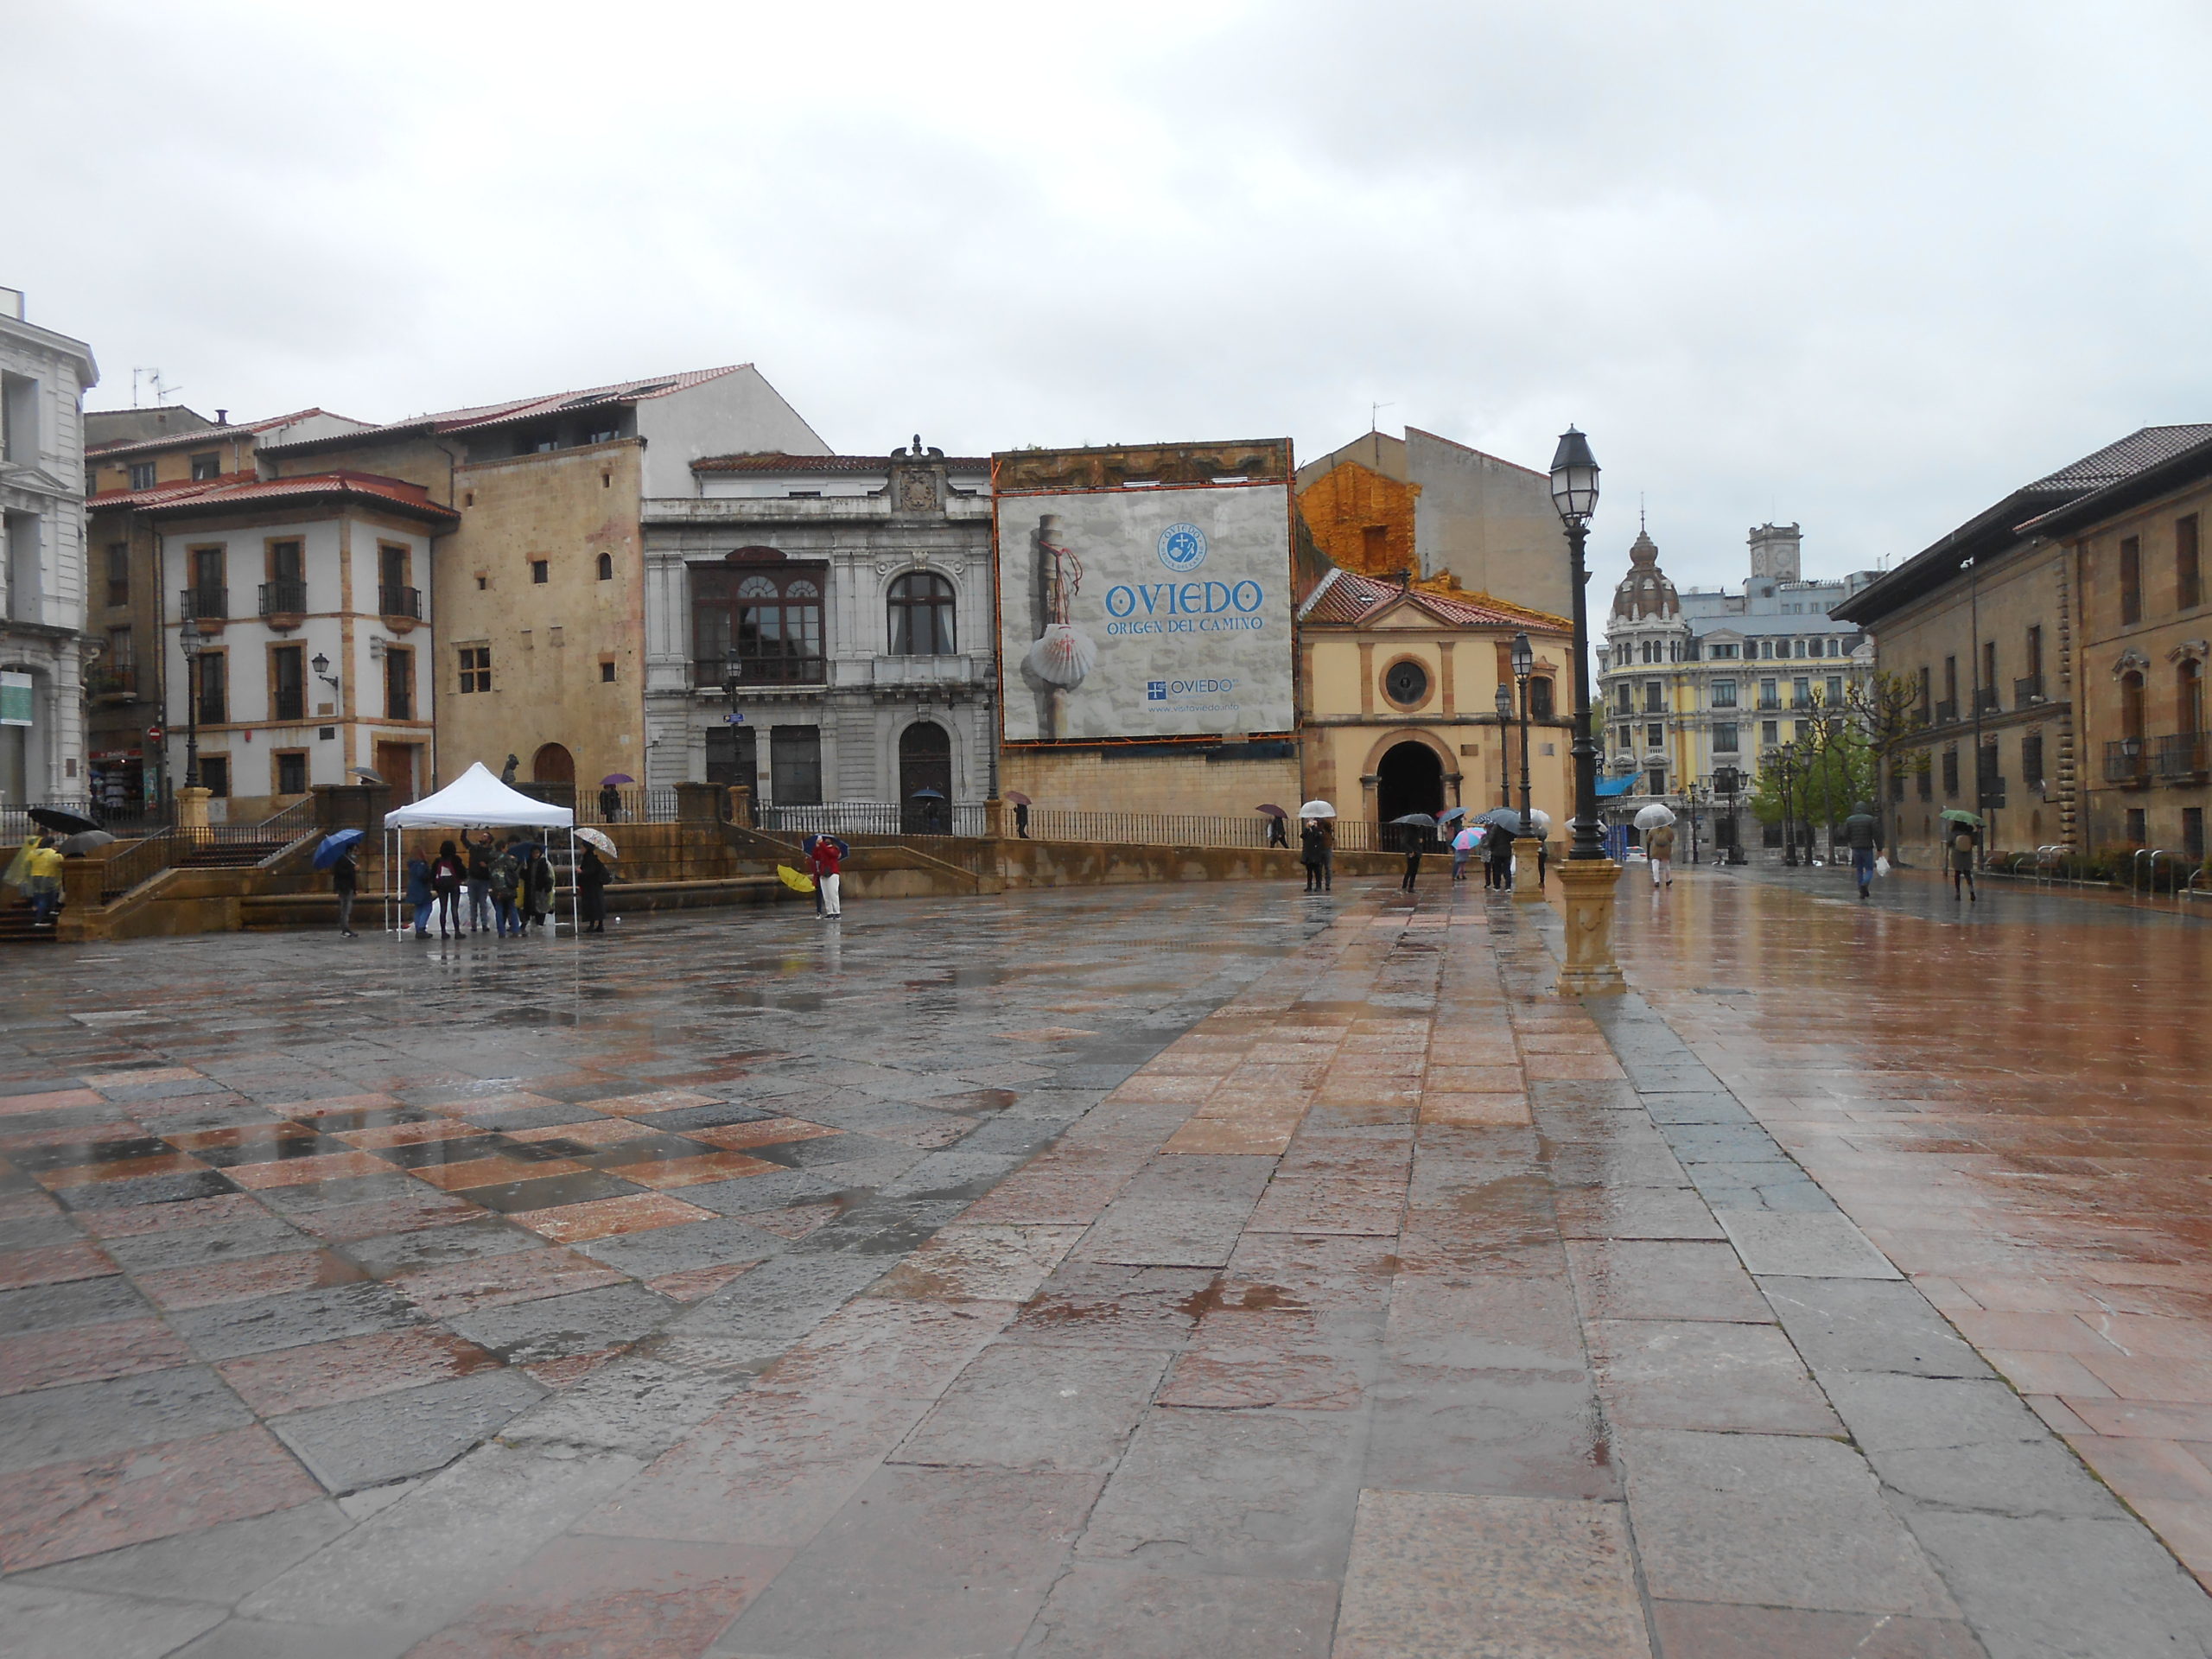 The Cathedral Plaza in Oviedo